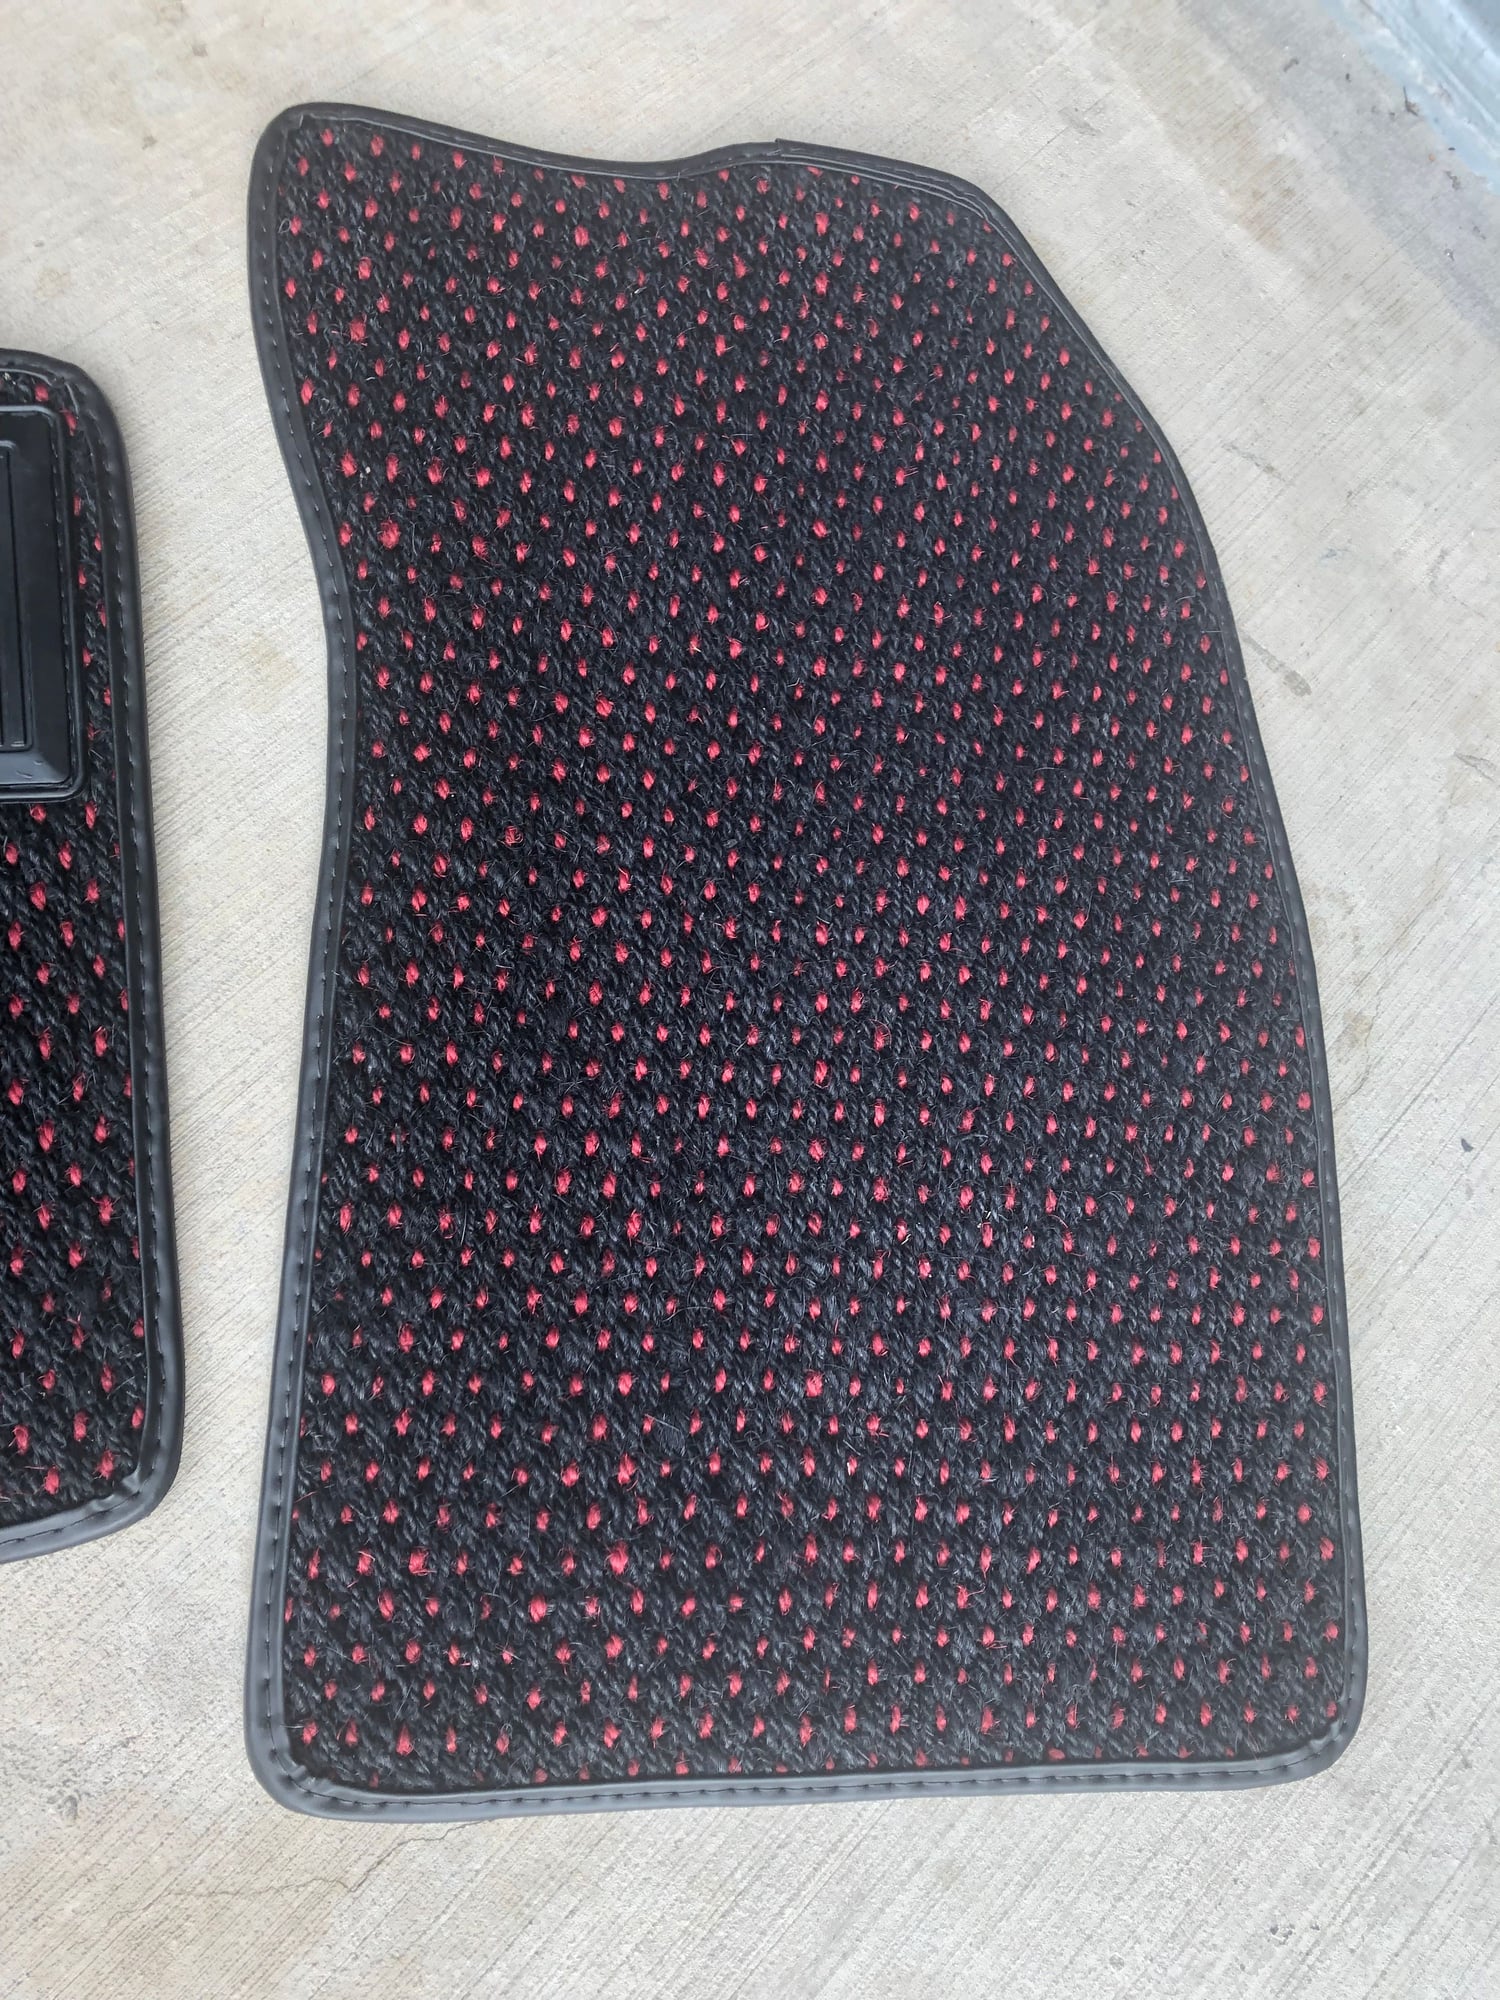 Interior/Upholstery - Coco Mats - 964 - Used - 1989 to 1994 Porsche 911 - Houston, TX 77007, United States